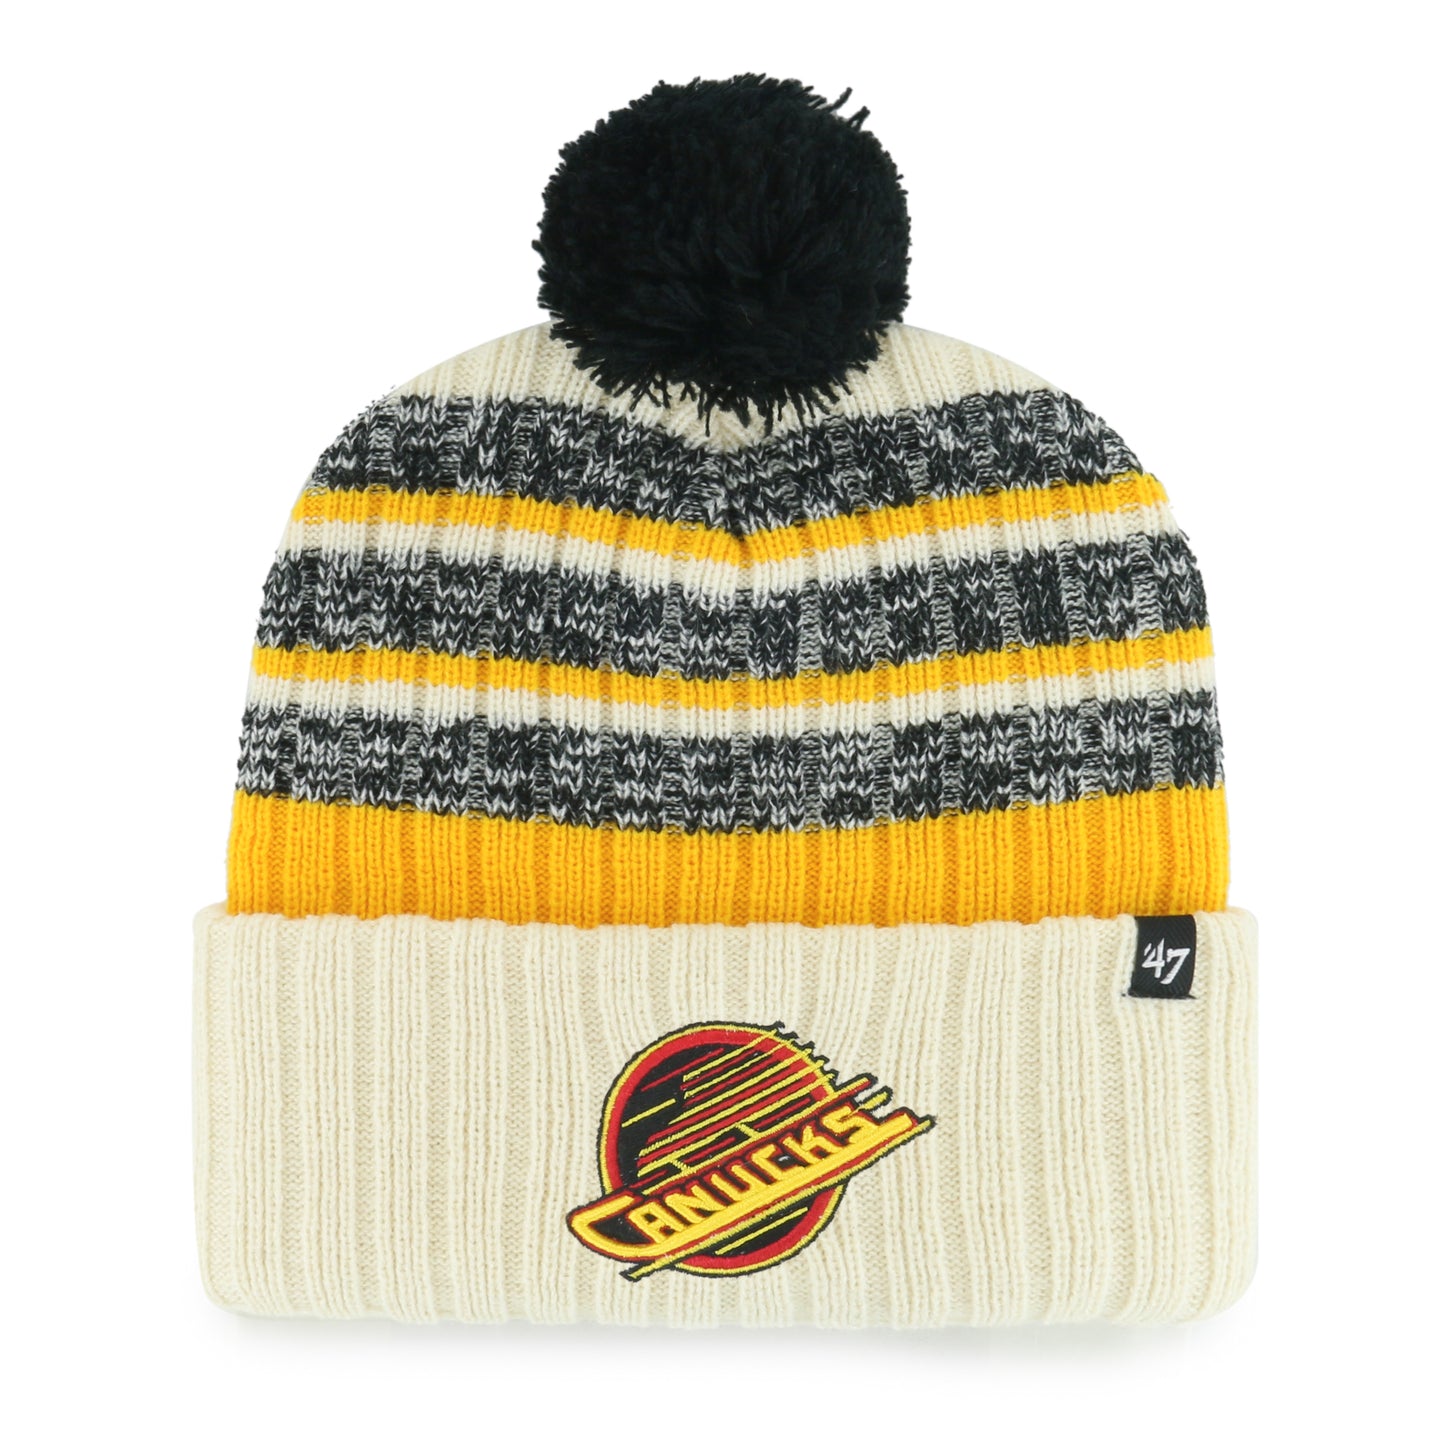 Vancouver Canucks Alternate - 47' 'Tavern' Cuff Knit Toque with Pom